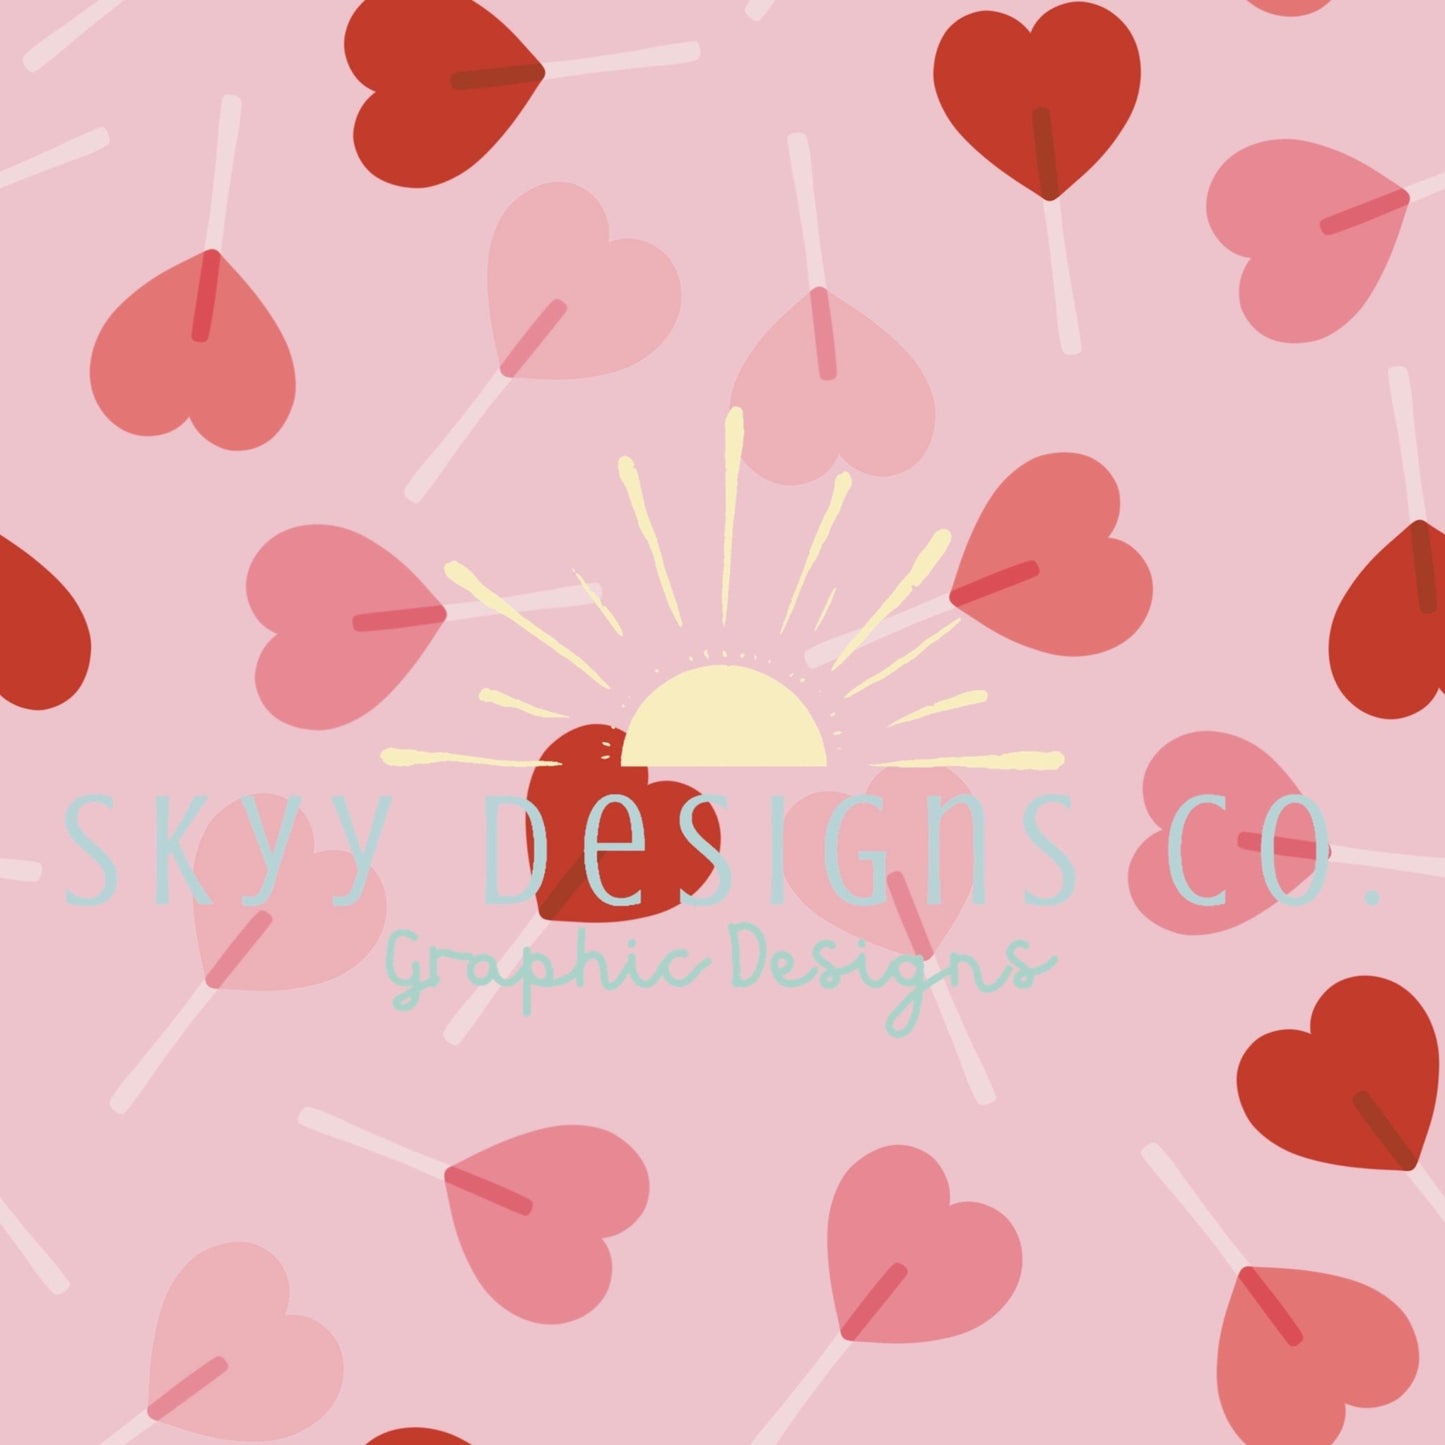 Valentine's Heart candies lollipops digital seamless pattern for fabrics and wallpapers, Lollipops seamless pattern, Hearts digital paper - SkyyDesignsCo